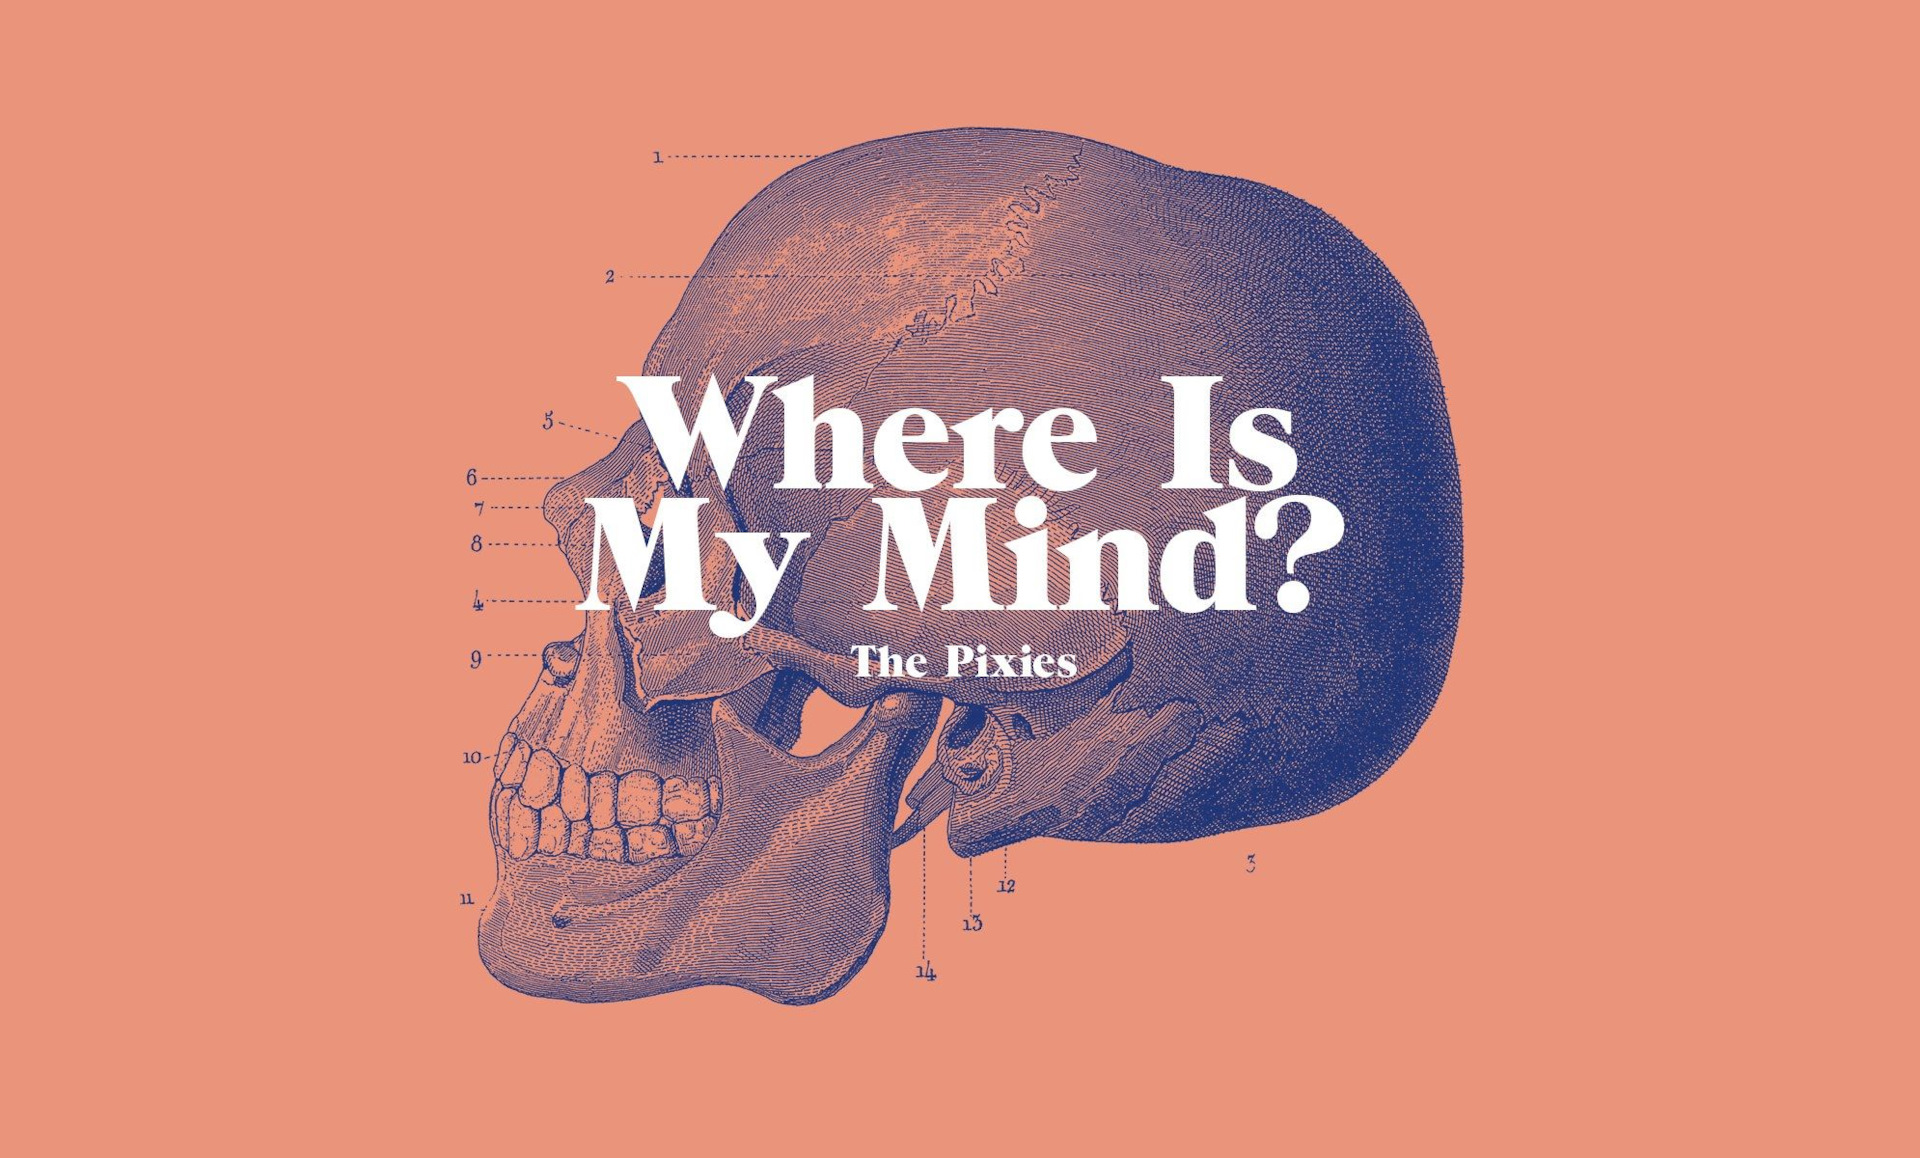 Where is my mind текст. Where is my Mind. Pixies where is Mind. Pixies where is my Mind обложка. Where is my Mind альбом.